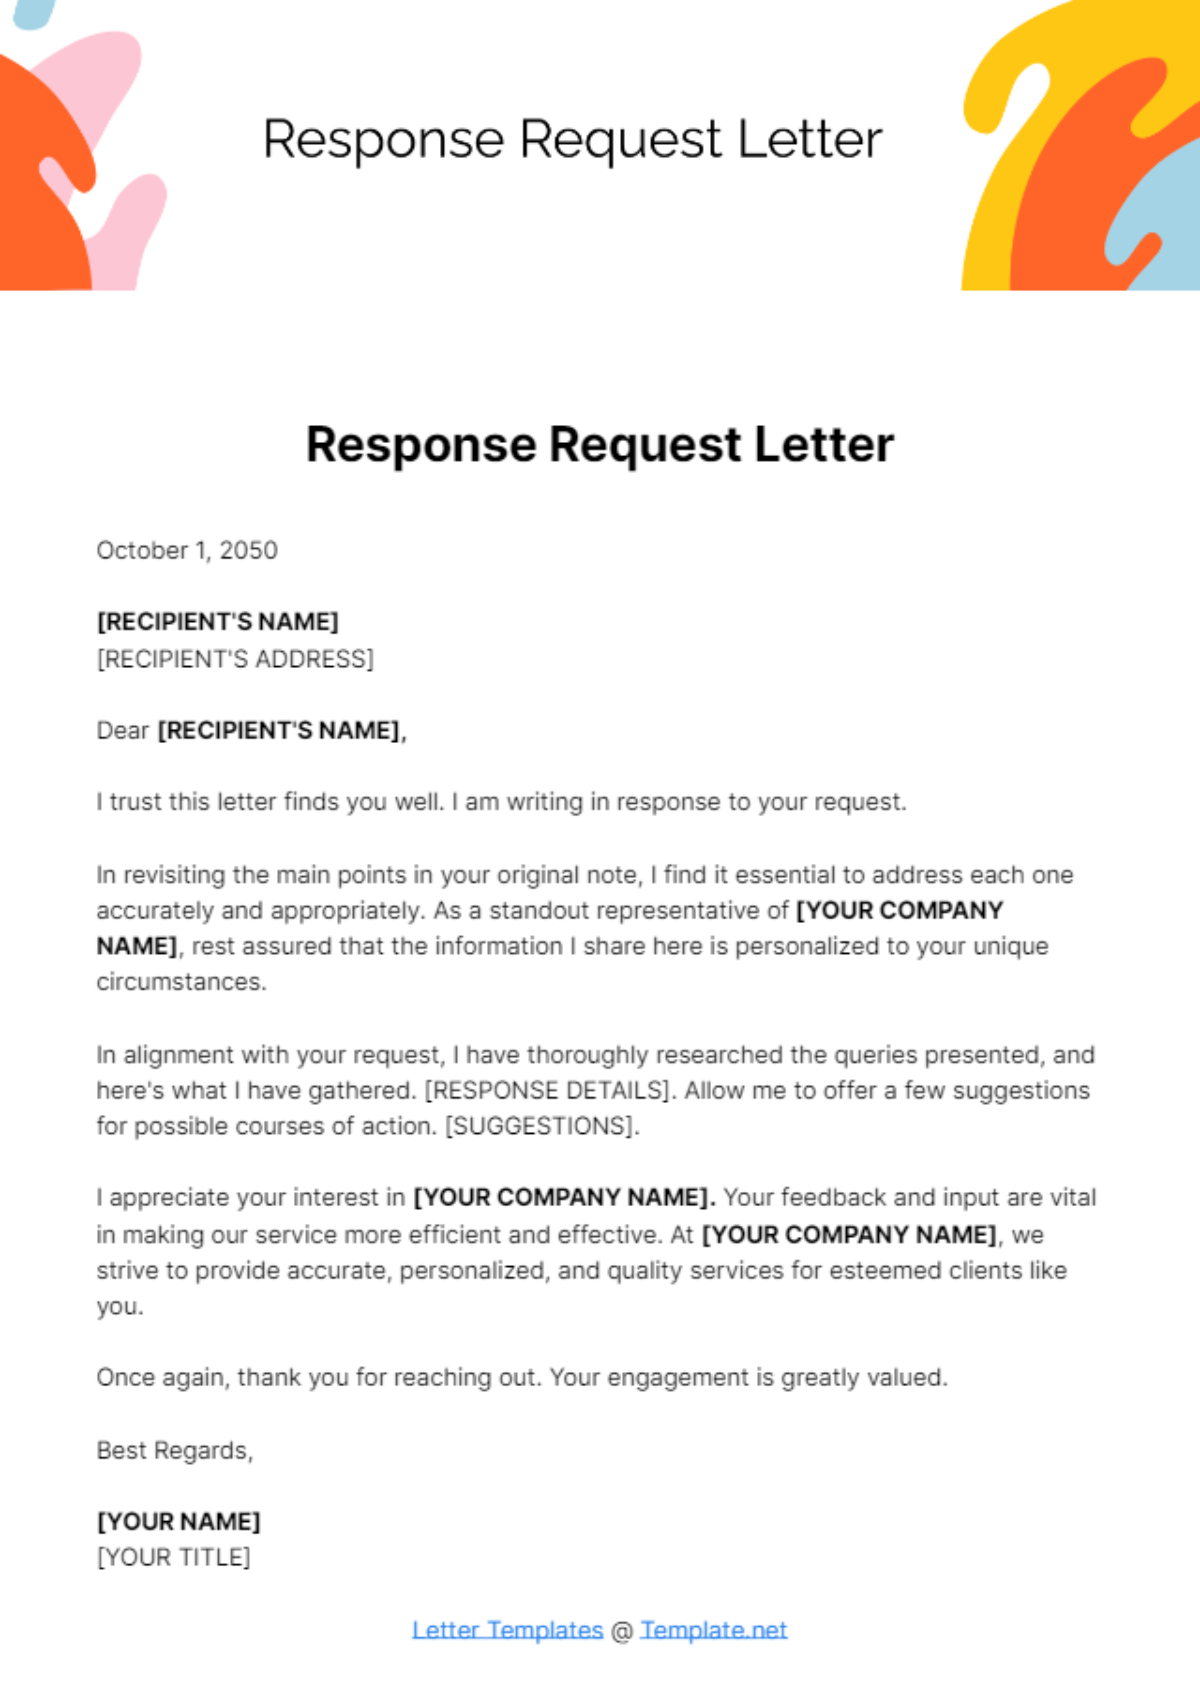 Response Request Letter Template